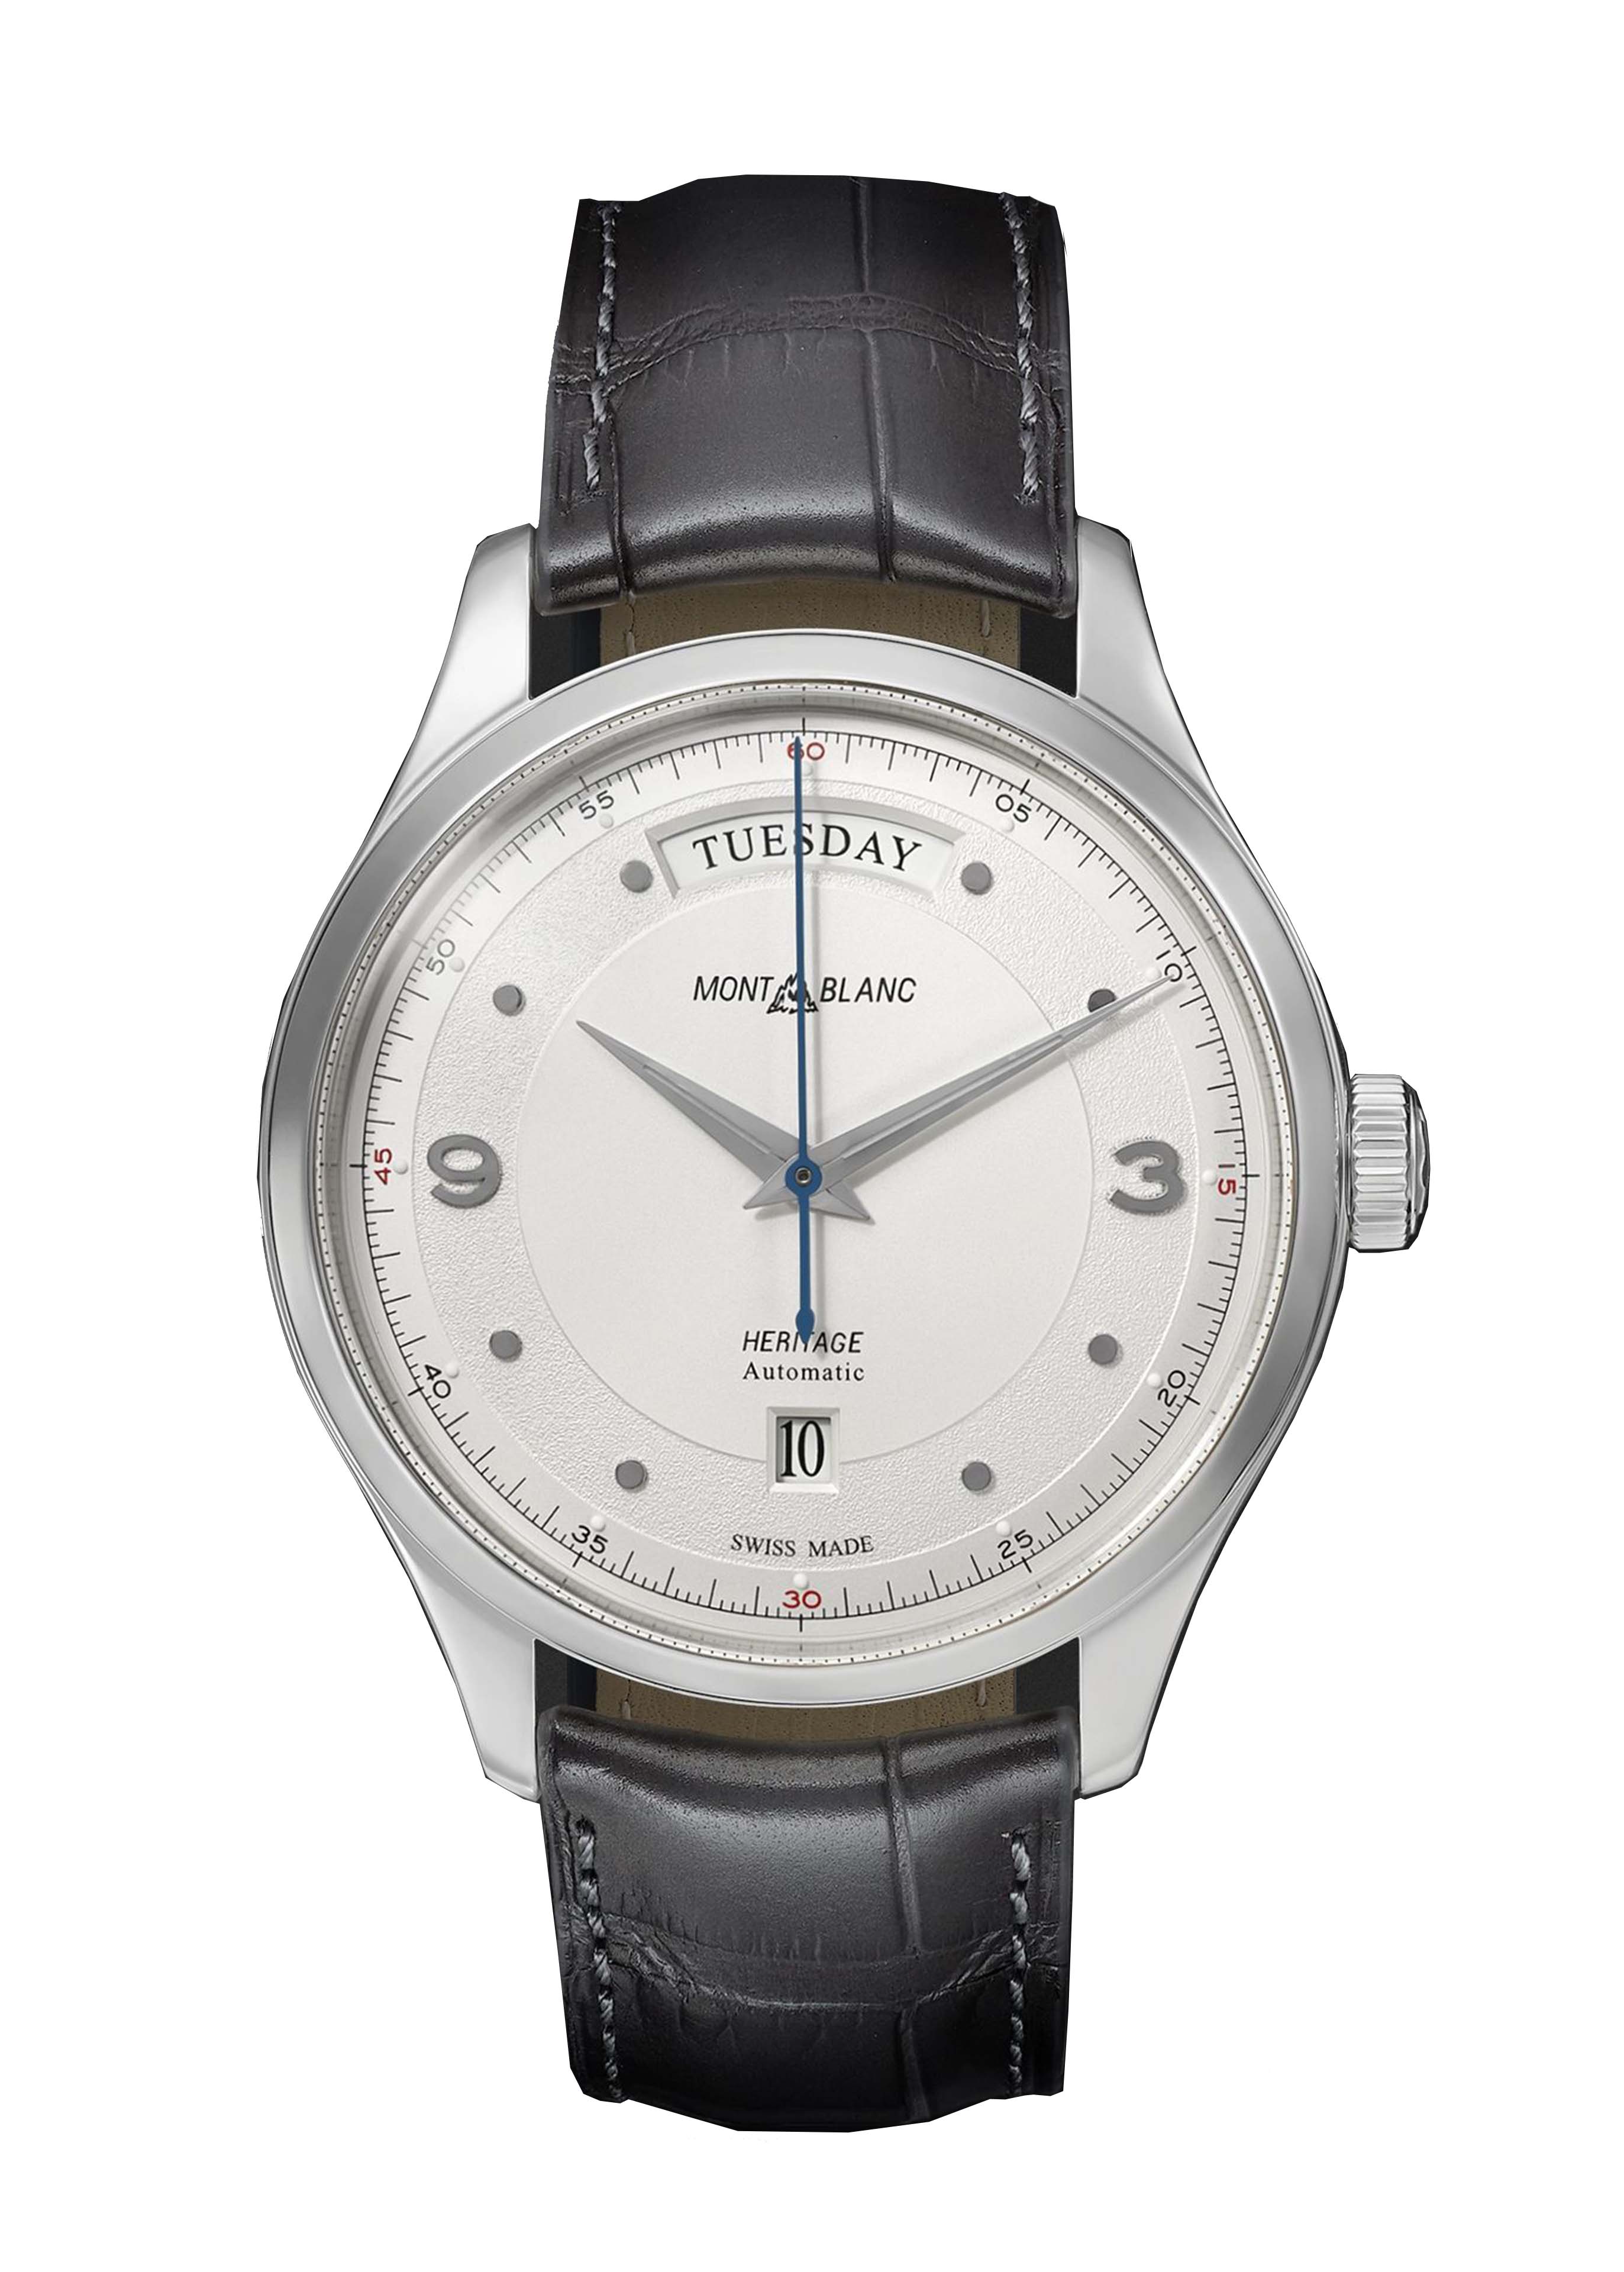 Heritage Automatic Day & Date Watch Image